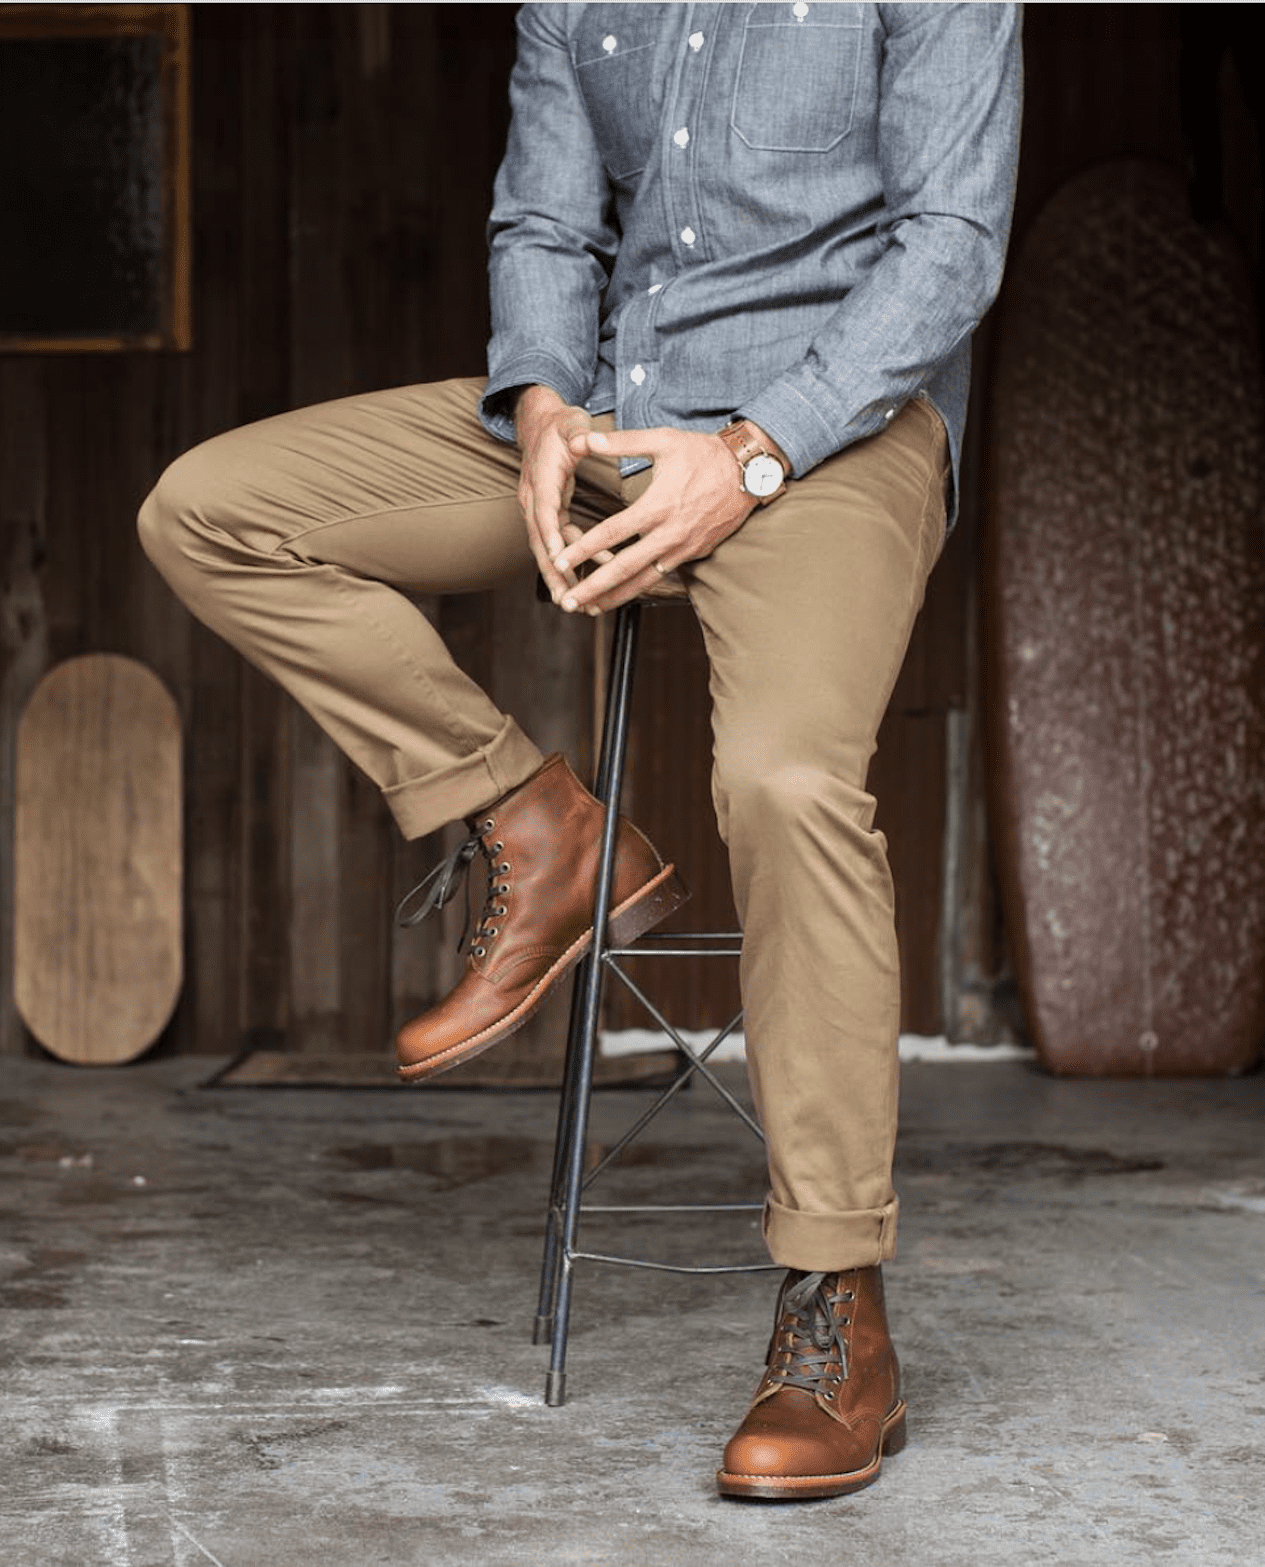 image of a man from the chest down sitting on a stool with a light blue button up shirt, khaki pants, and brown boots